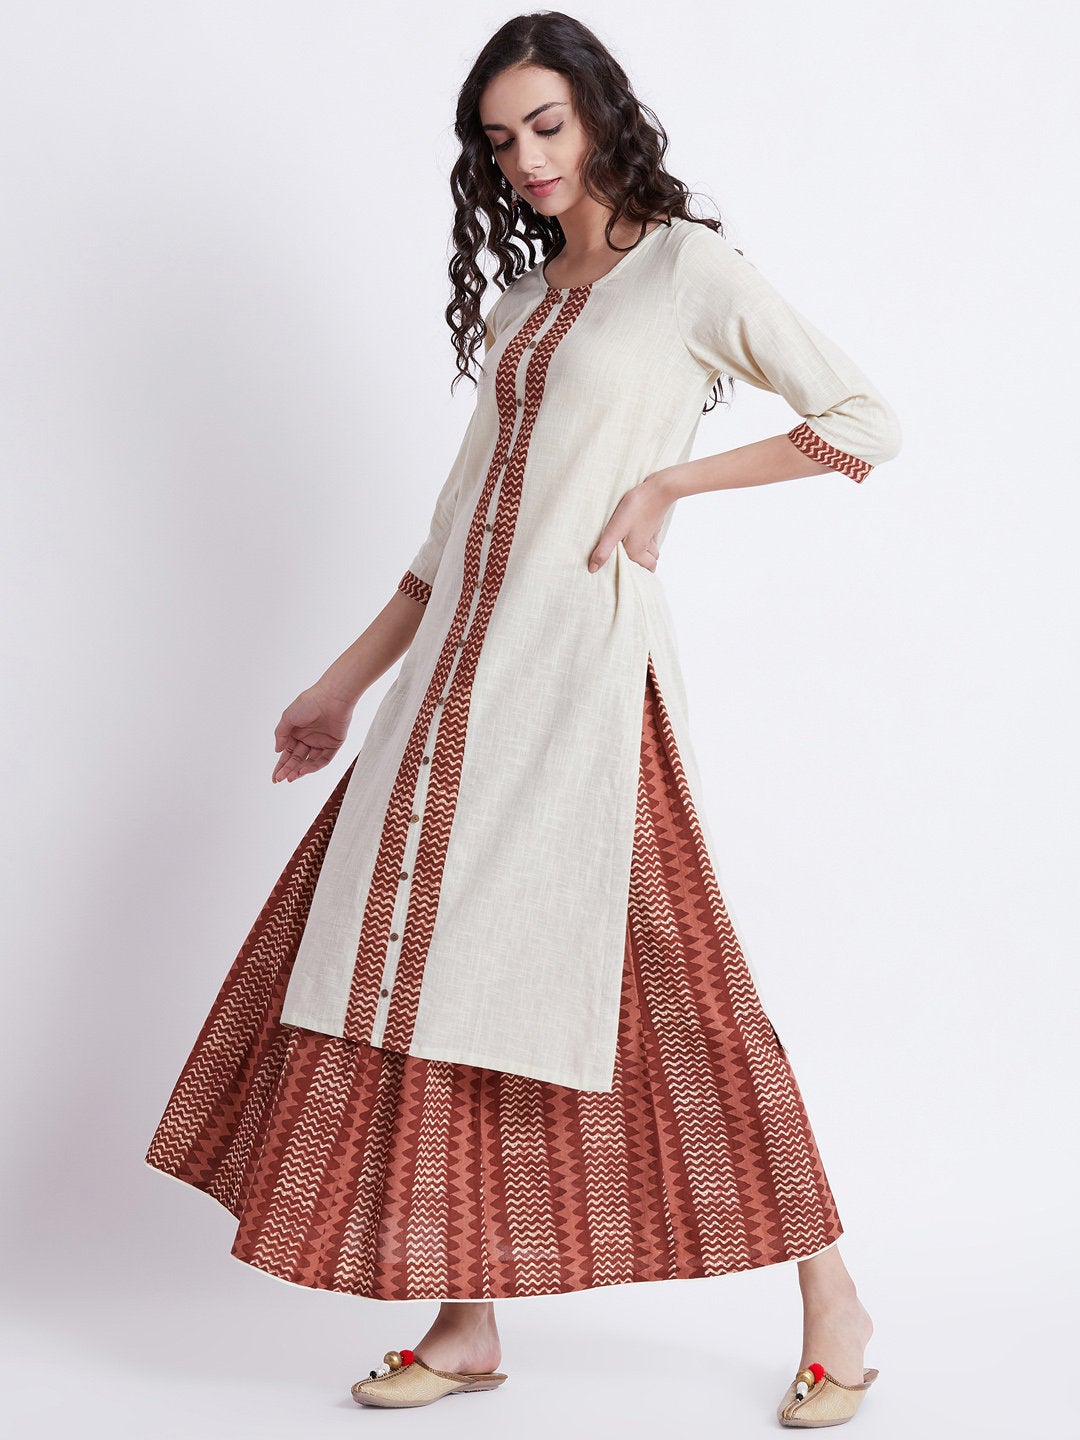 Hand block printed skirt with off-white long cotton kurta with print detailing on front & sleeves